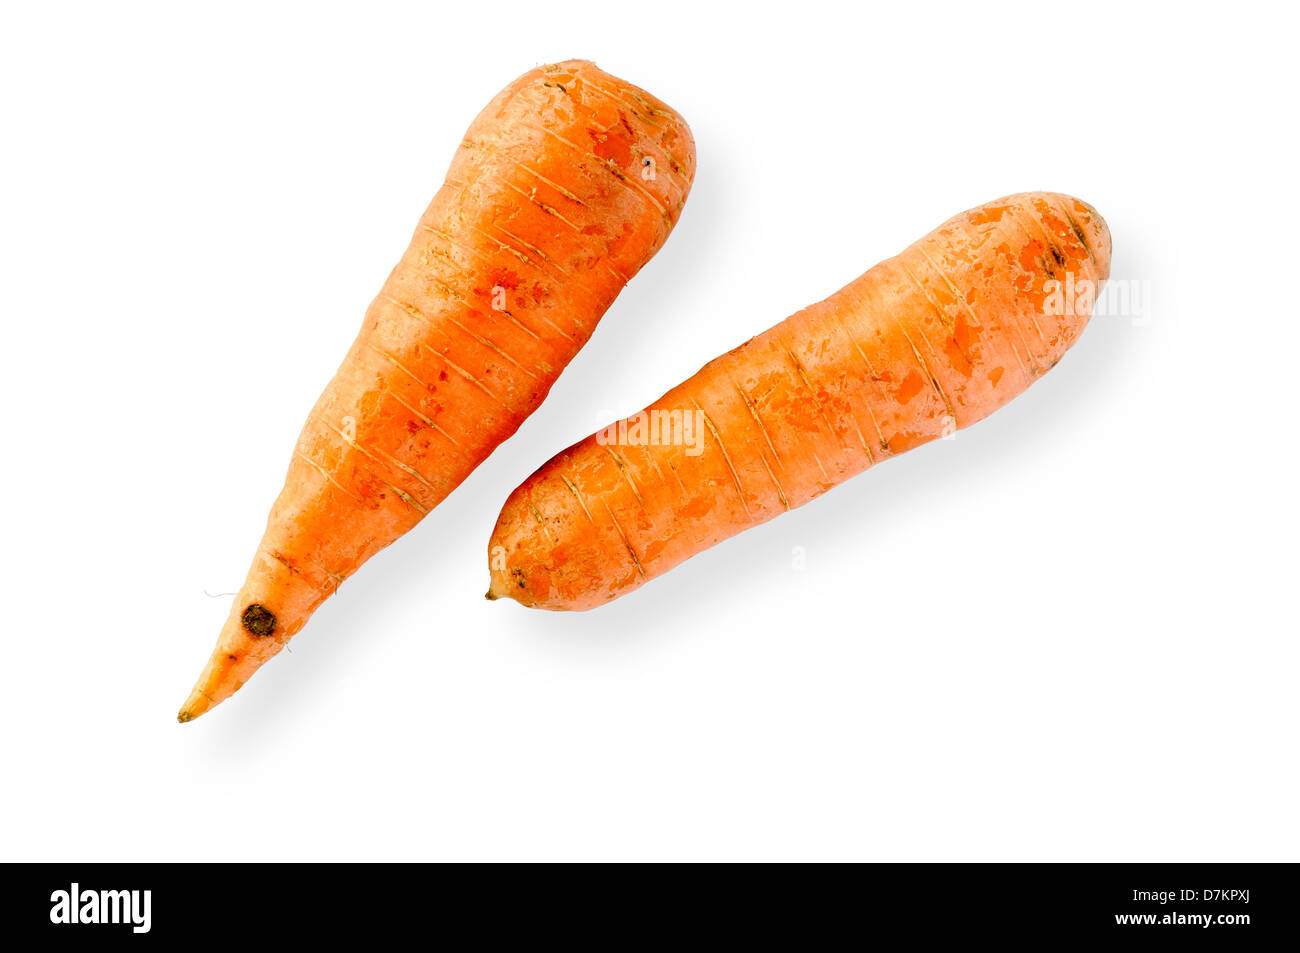 Two nice carrots on a white background (clipping path included only in the original image) Stock Photo